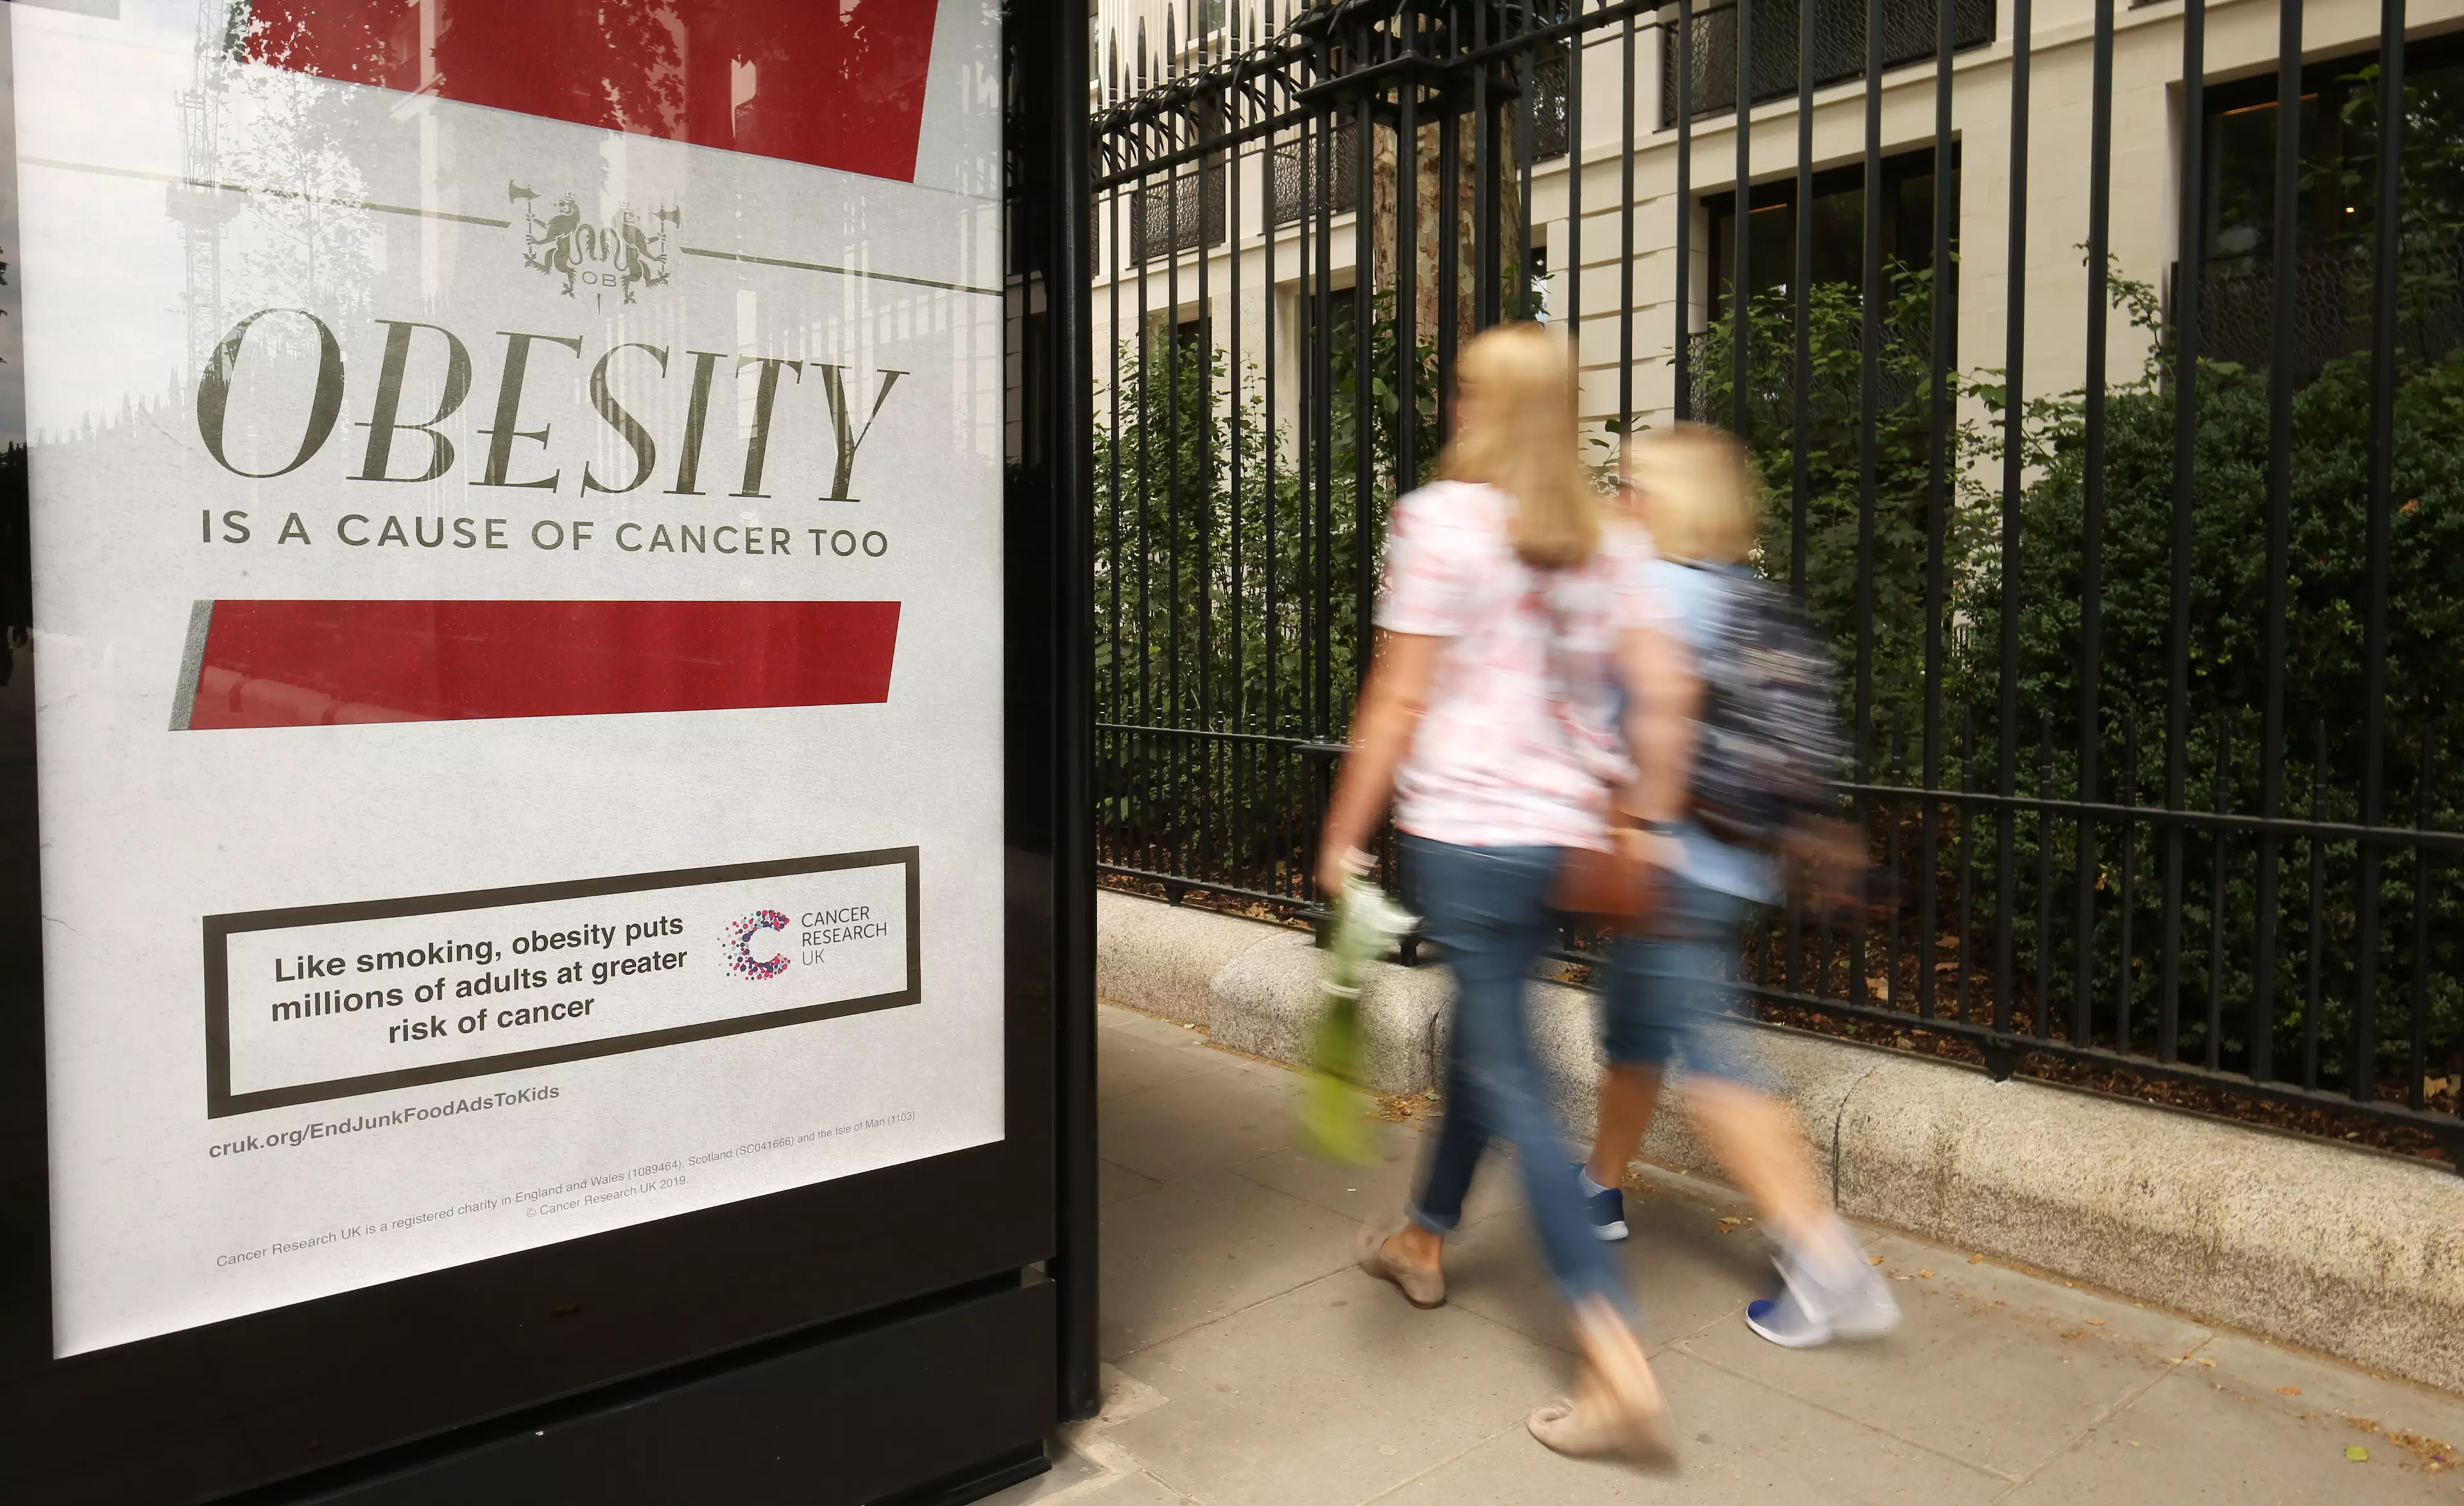 A recent campaign by Cancer Research UK says that obesity causes cancer as well as smoking.